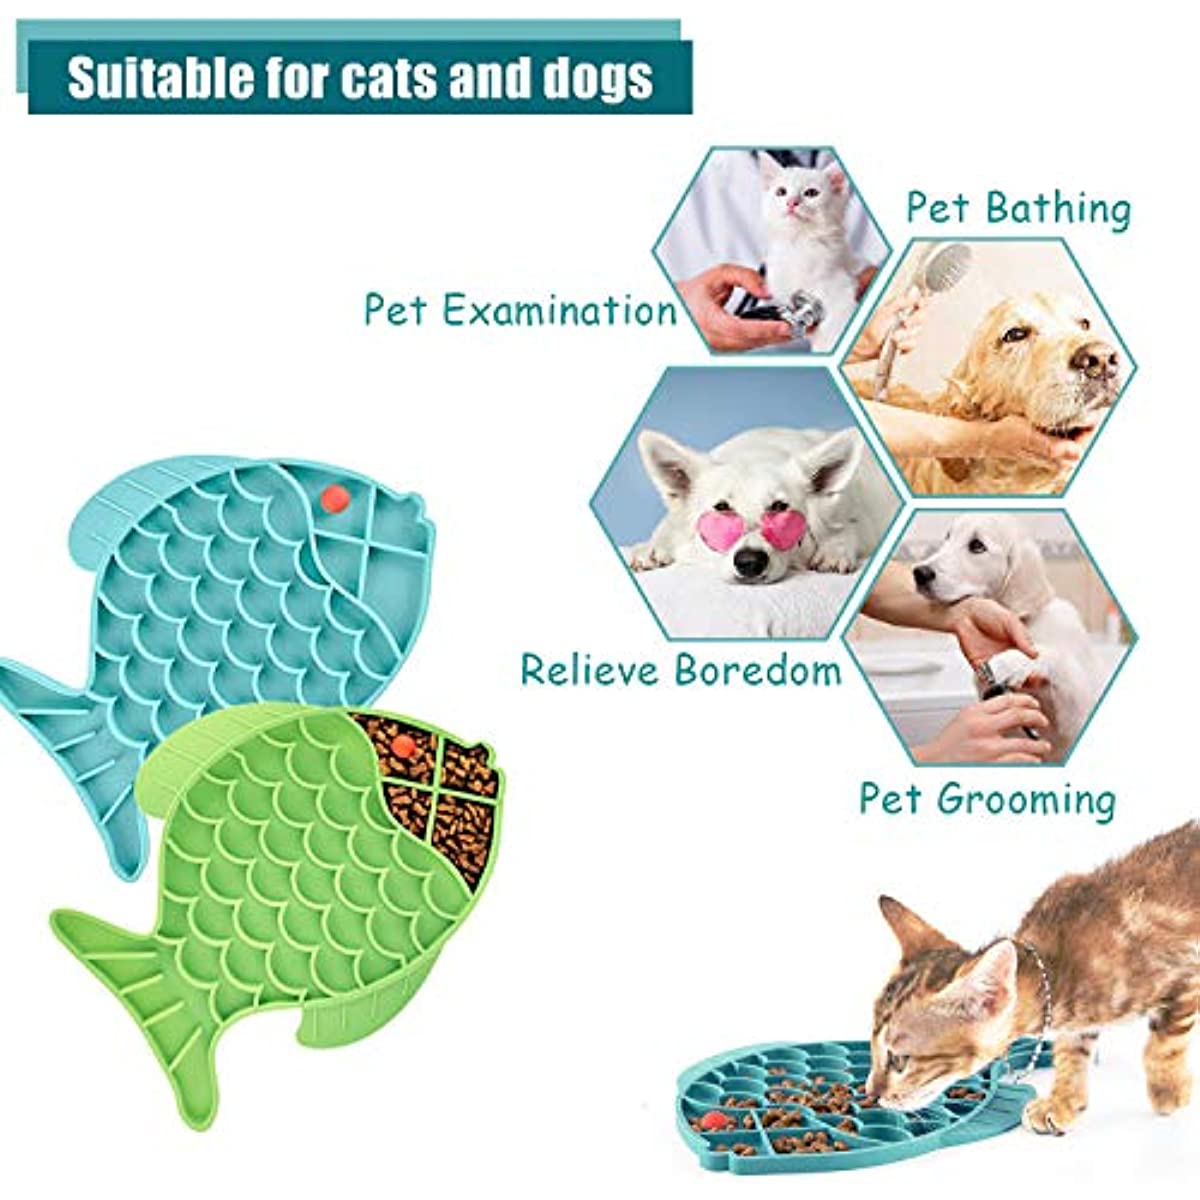 2 Pcs Big Pet Licking Mat for Dogs and Cats - Dog Lick Mat with Suction  Cups - Cat & Dog Slow Feeder Mat for Healthy Digestion, Anxiety and Stress  Relief 